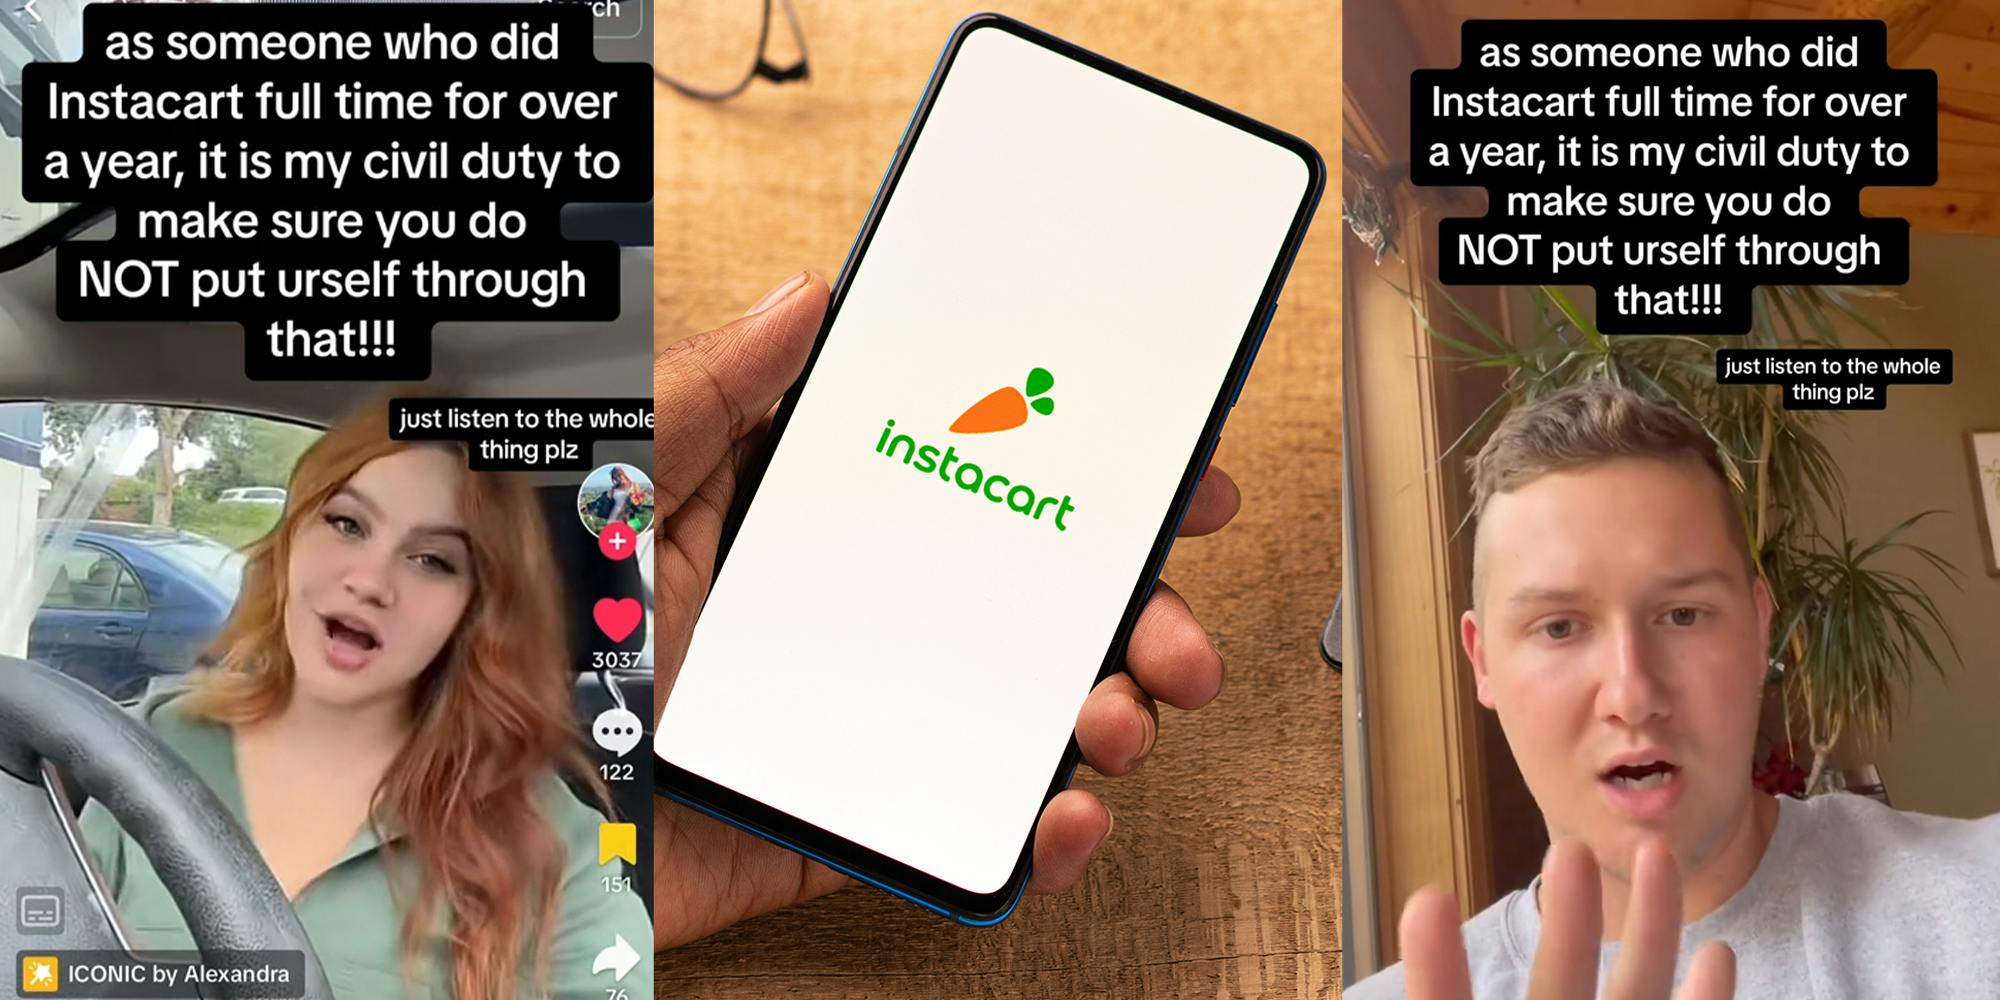 Former Instacart shopper shares PSA for people thinking about doing Instacart